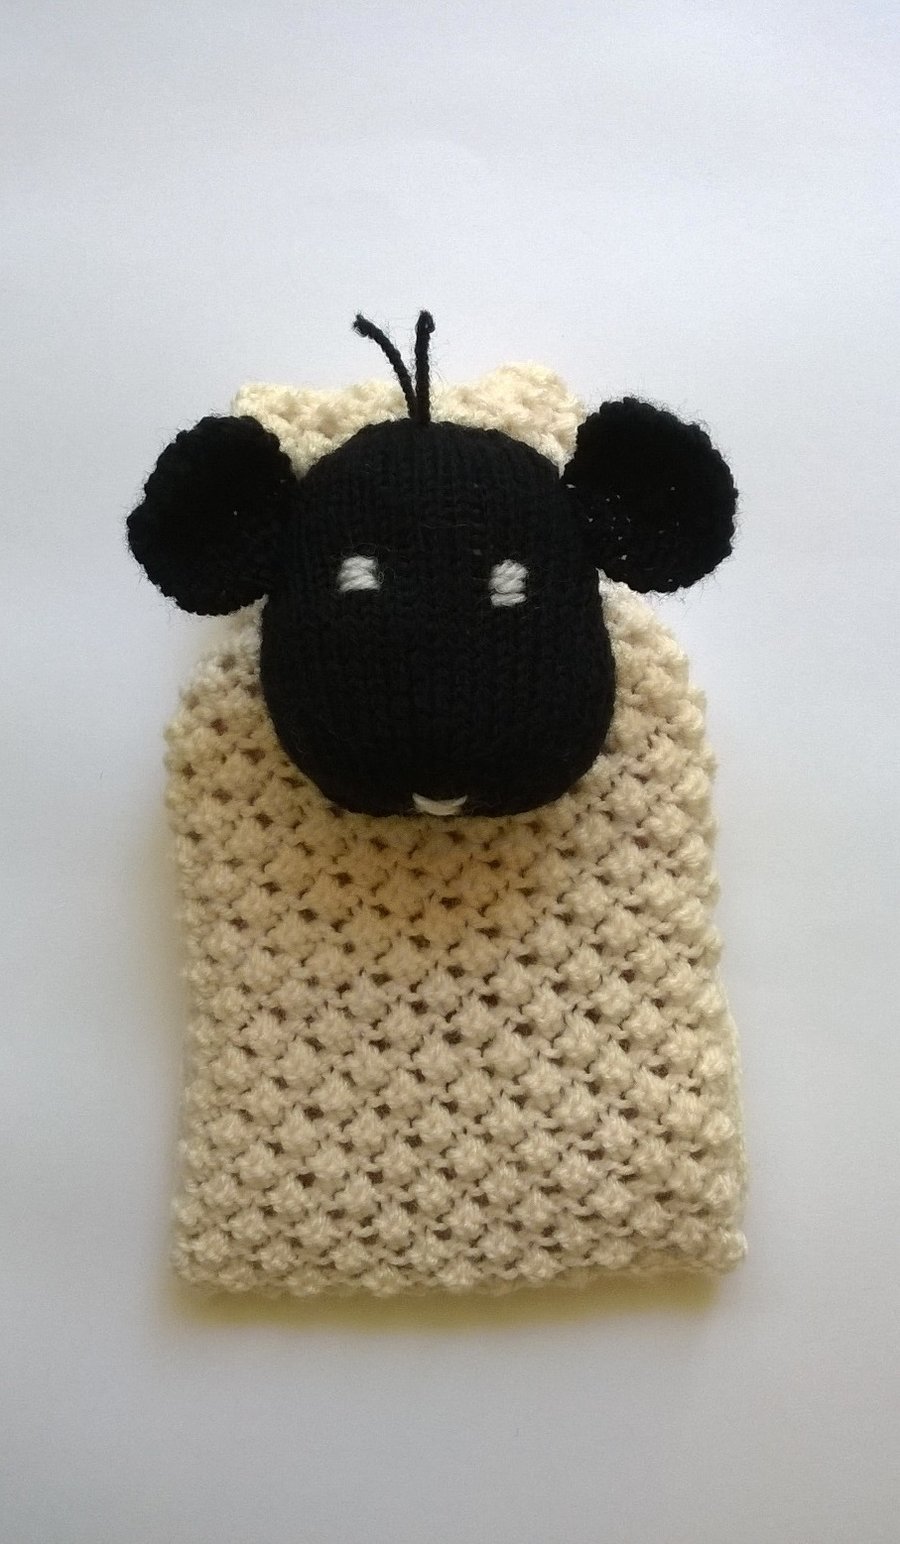 Hand knitted sheep Hot Water Bottle Cover